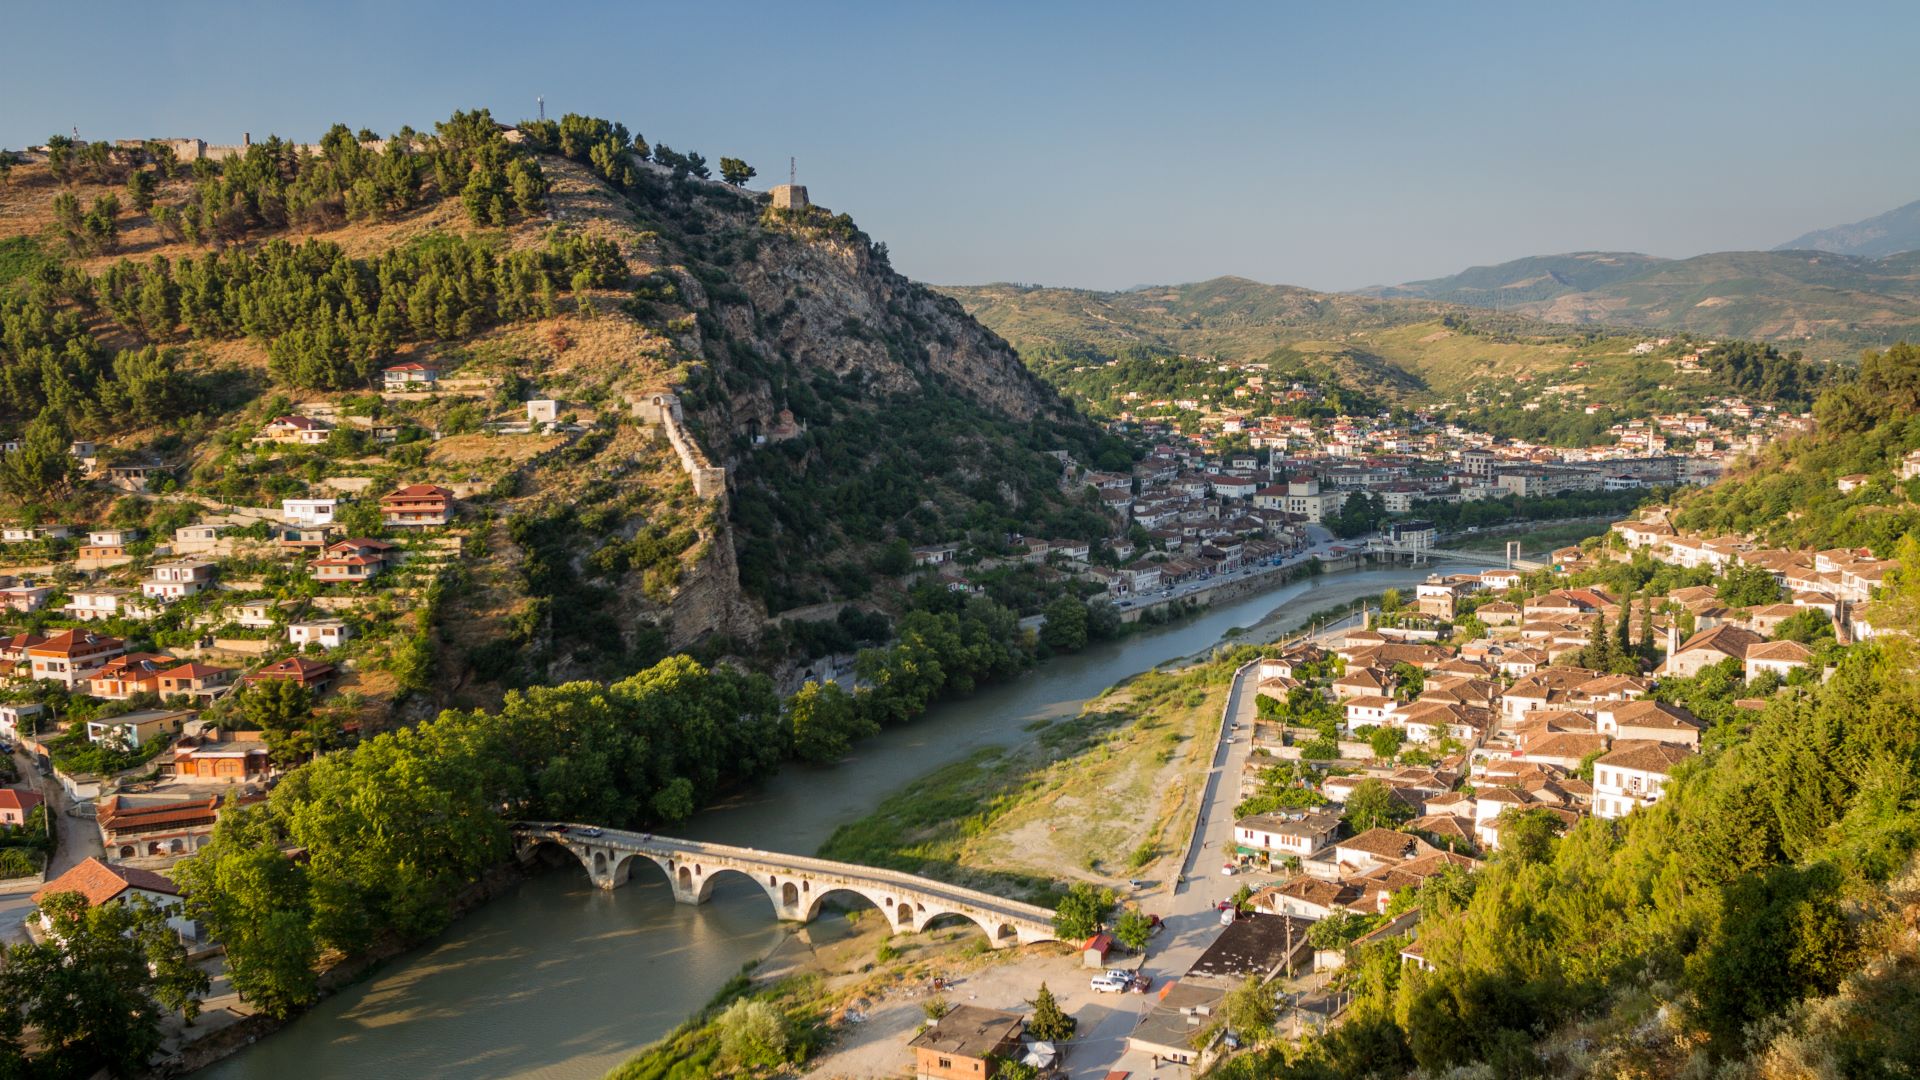 Berat - The city of one above other windows